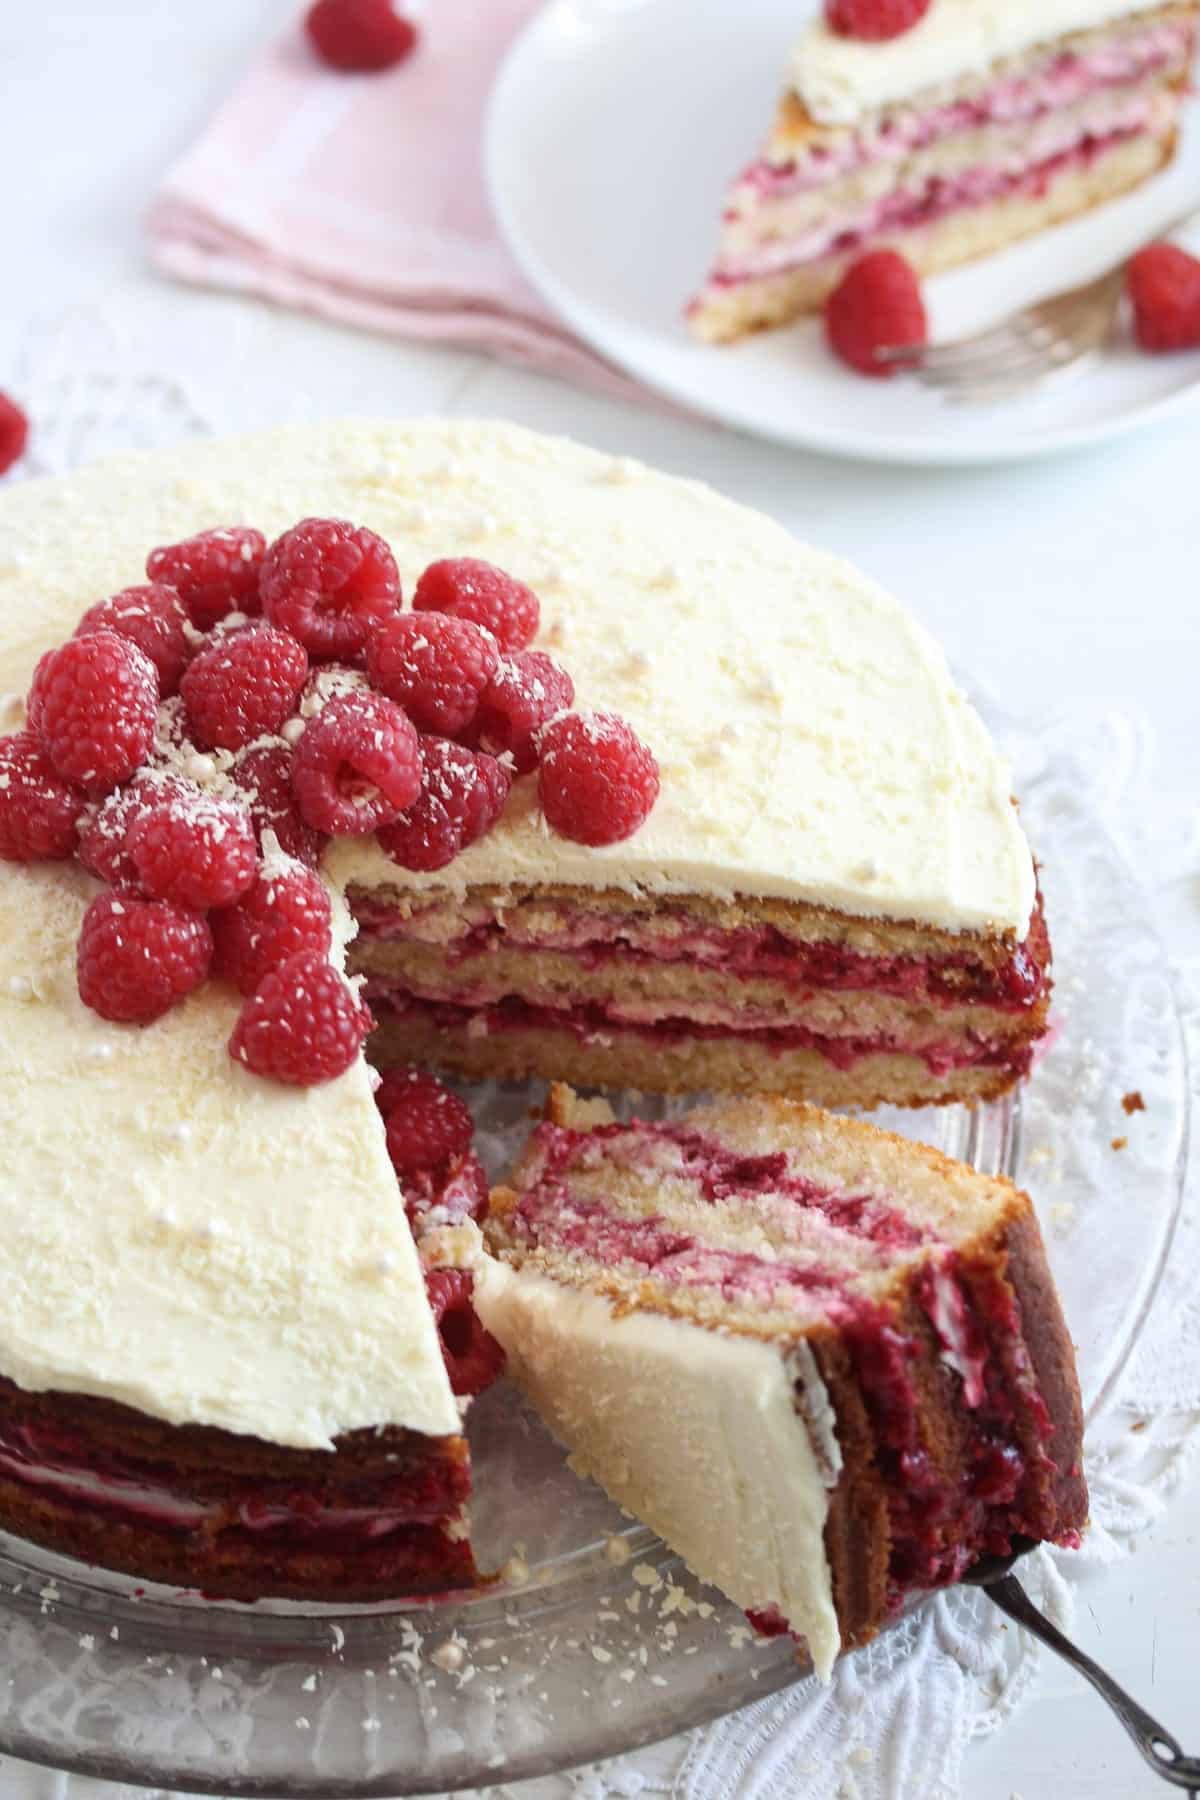 long image of sliced cake with raspberry filling and berries on top.